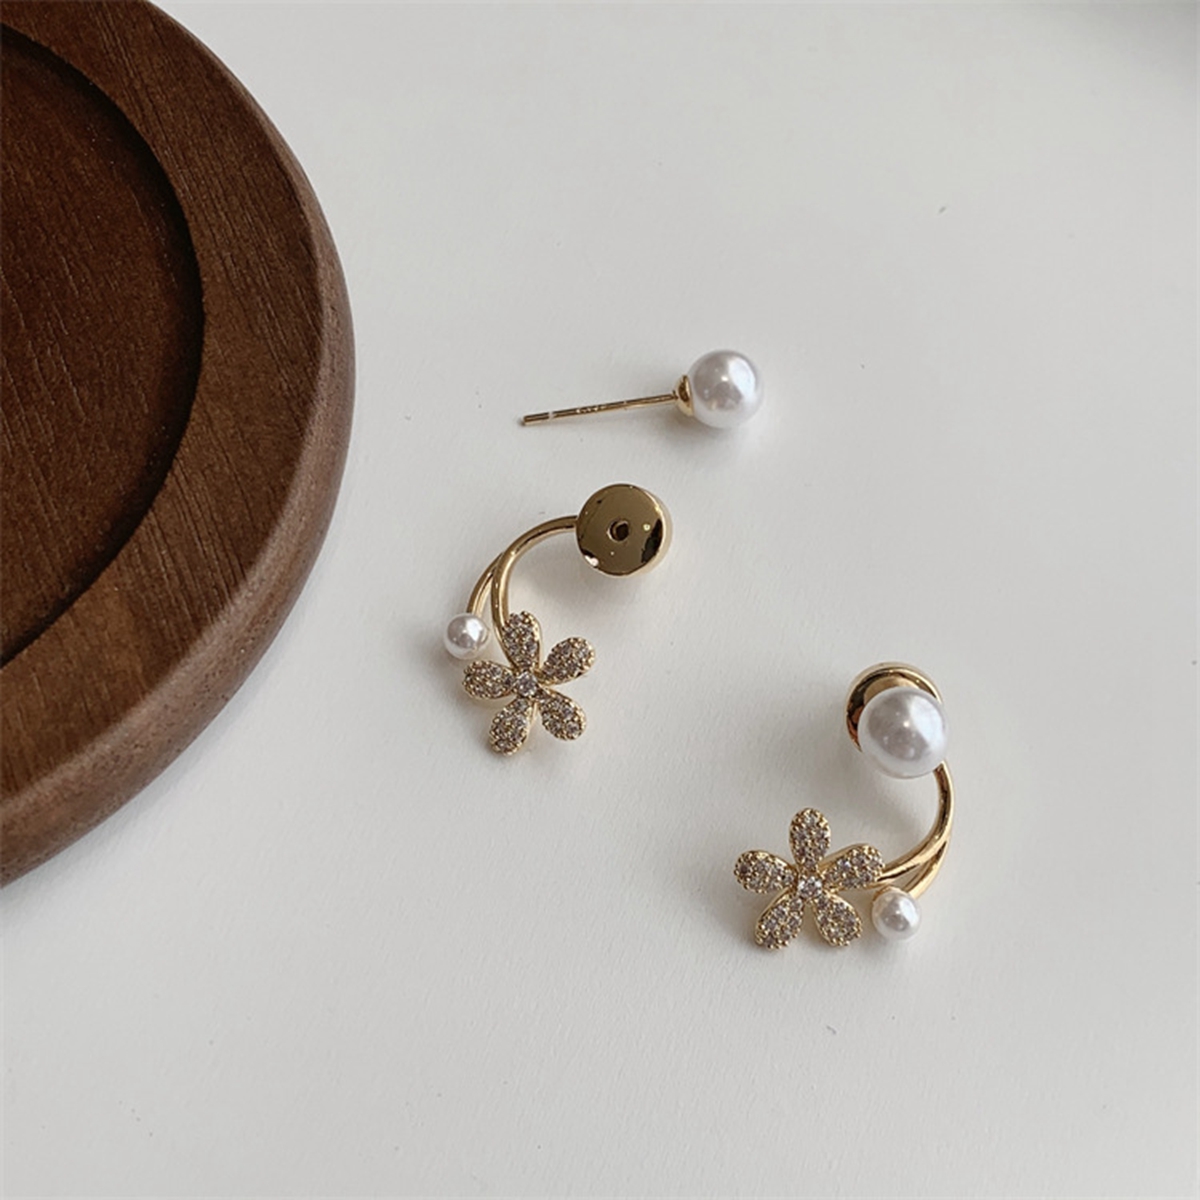 New Imitation Pearl Flower charm Earrings For Women Fashion Crystal Elegant Jewelry Party Gifts